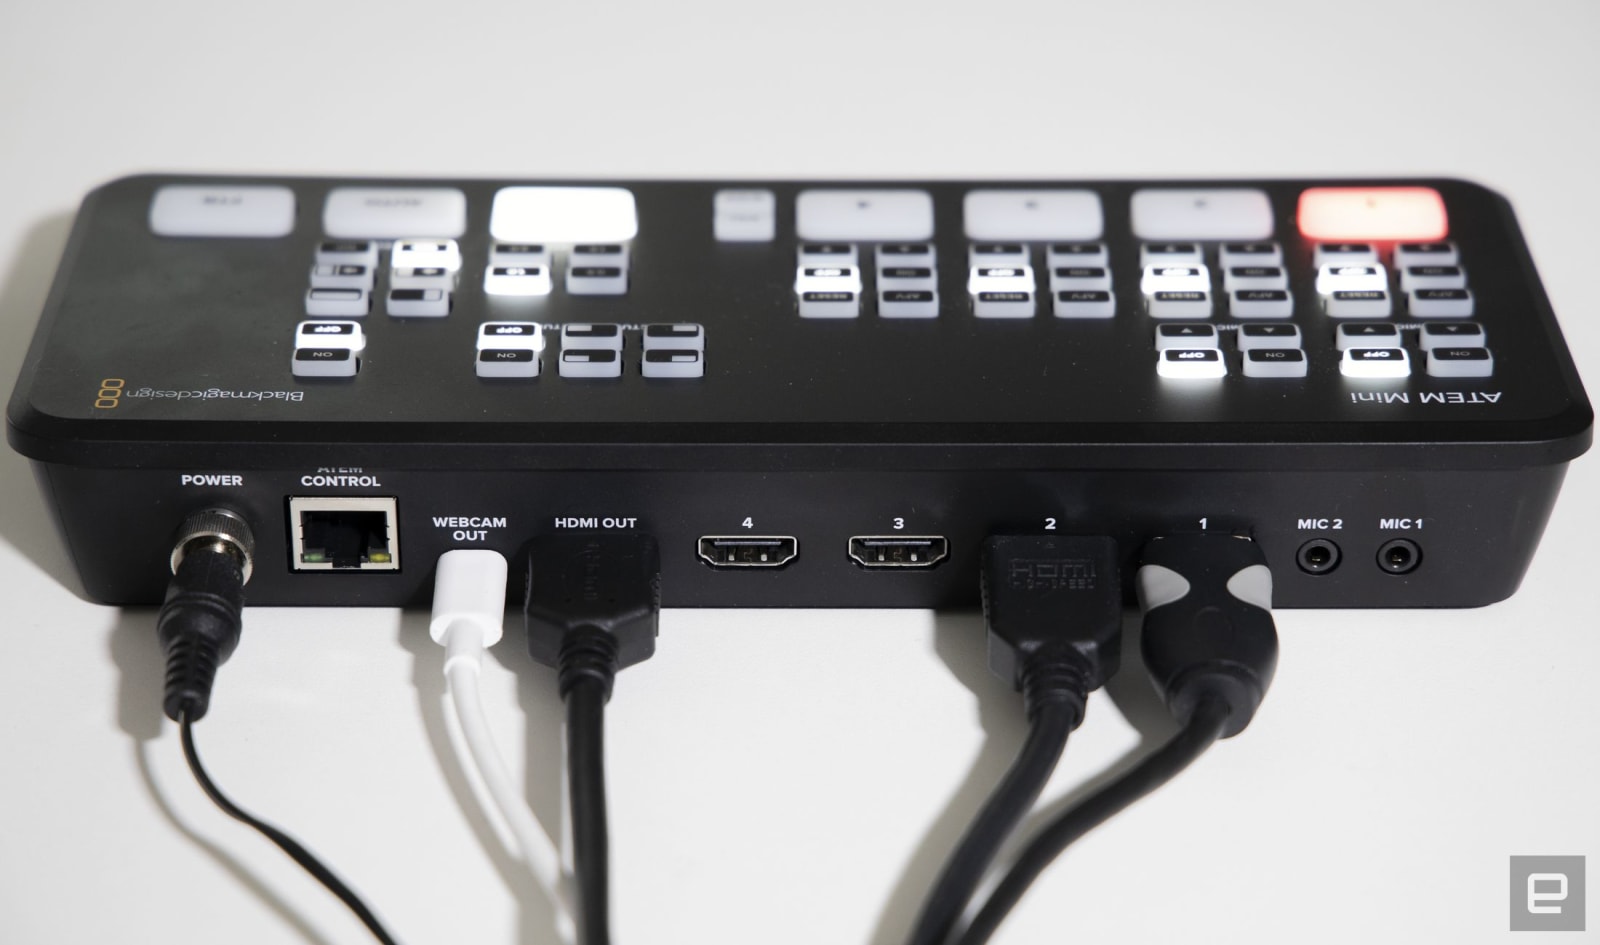 Blackmagic's ATEM Mini brings broadcast quality to YouTube and Twitch